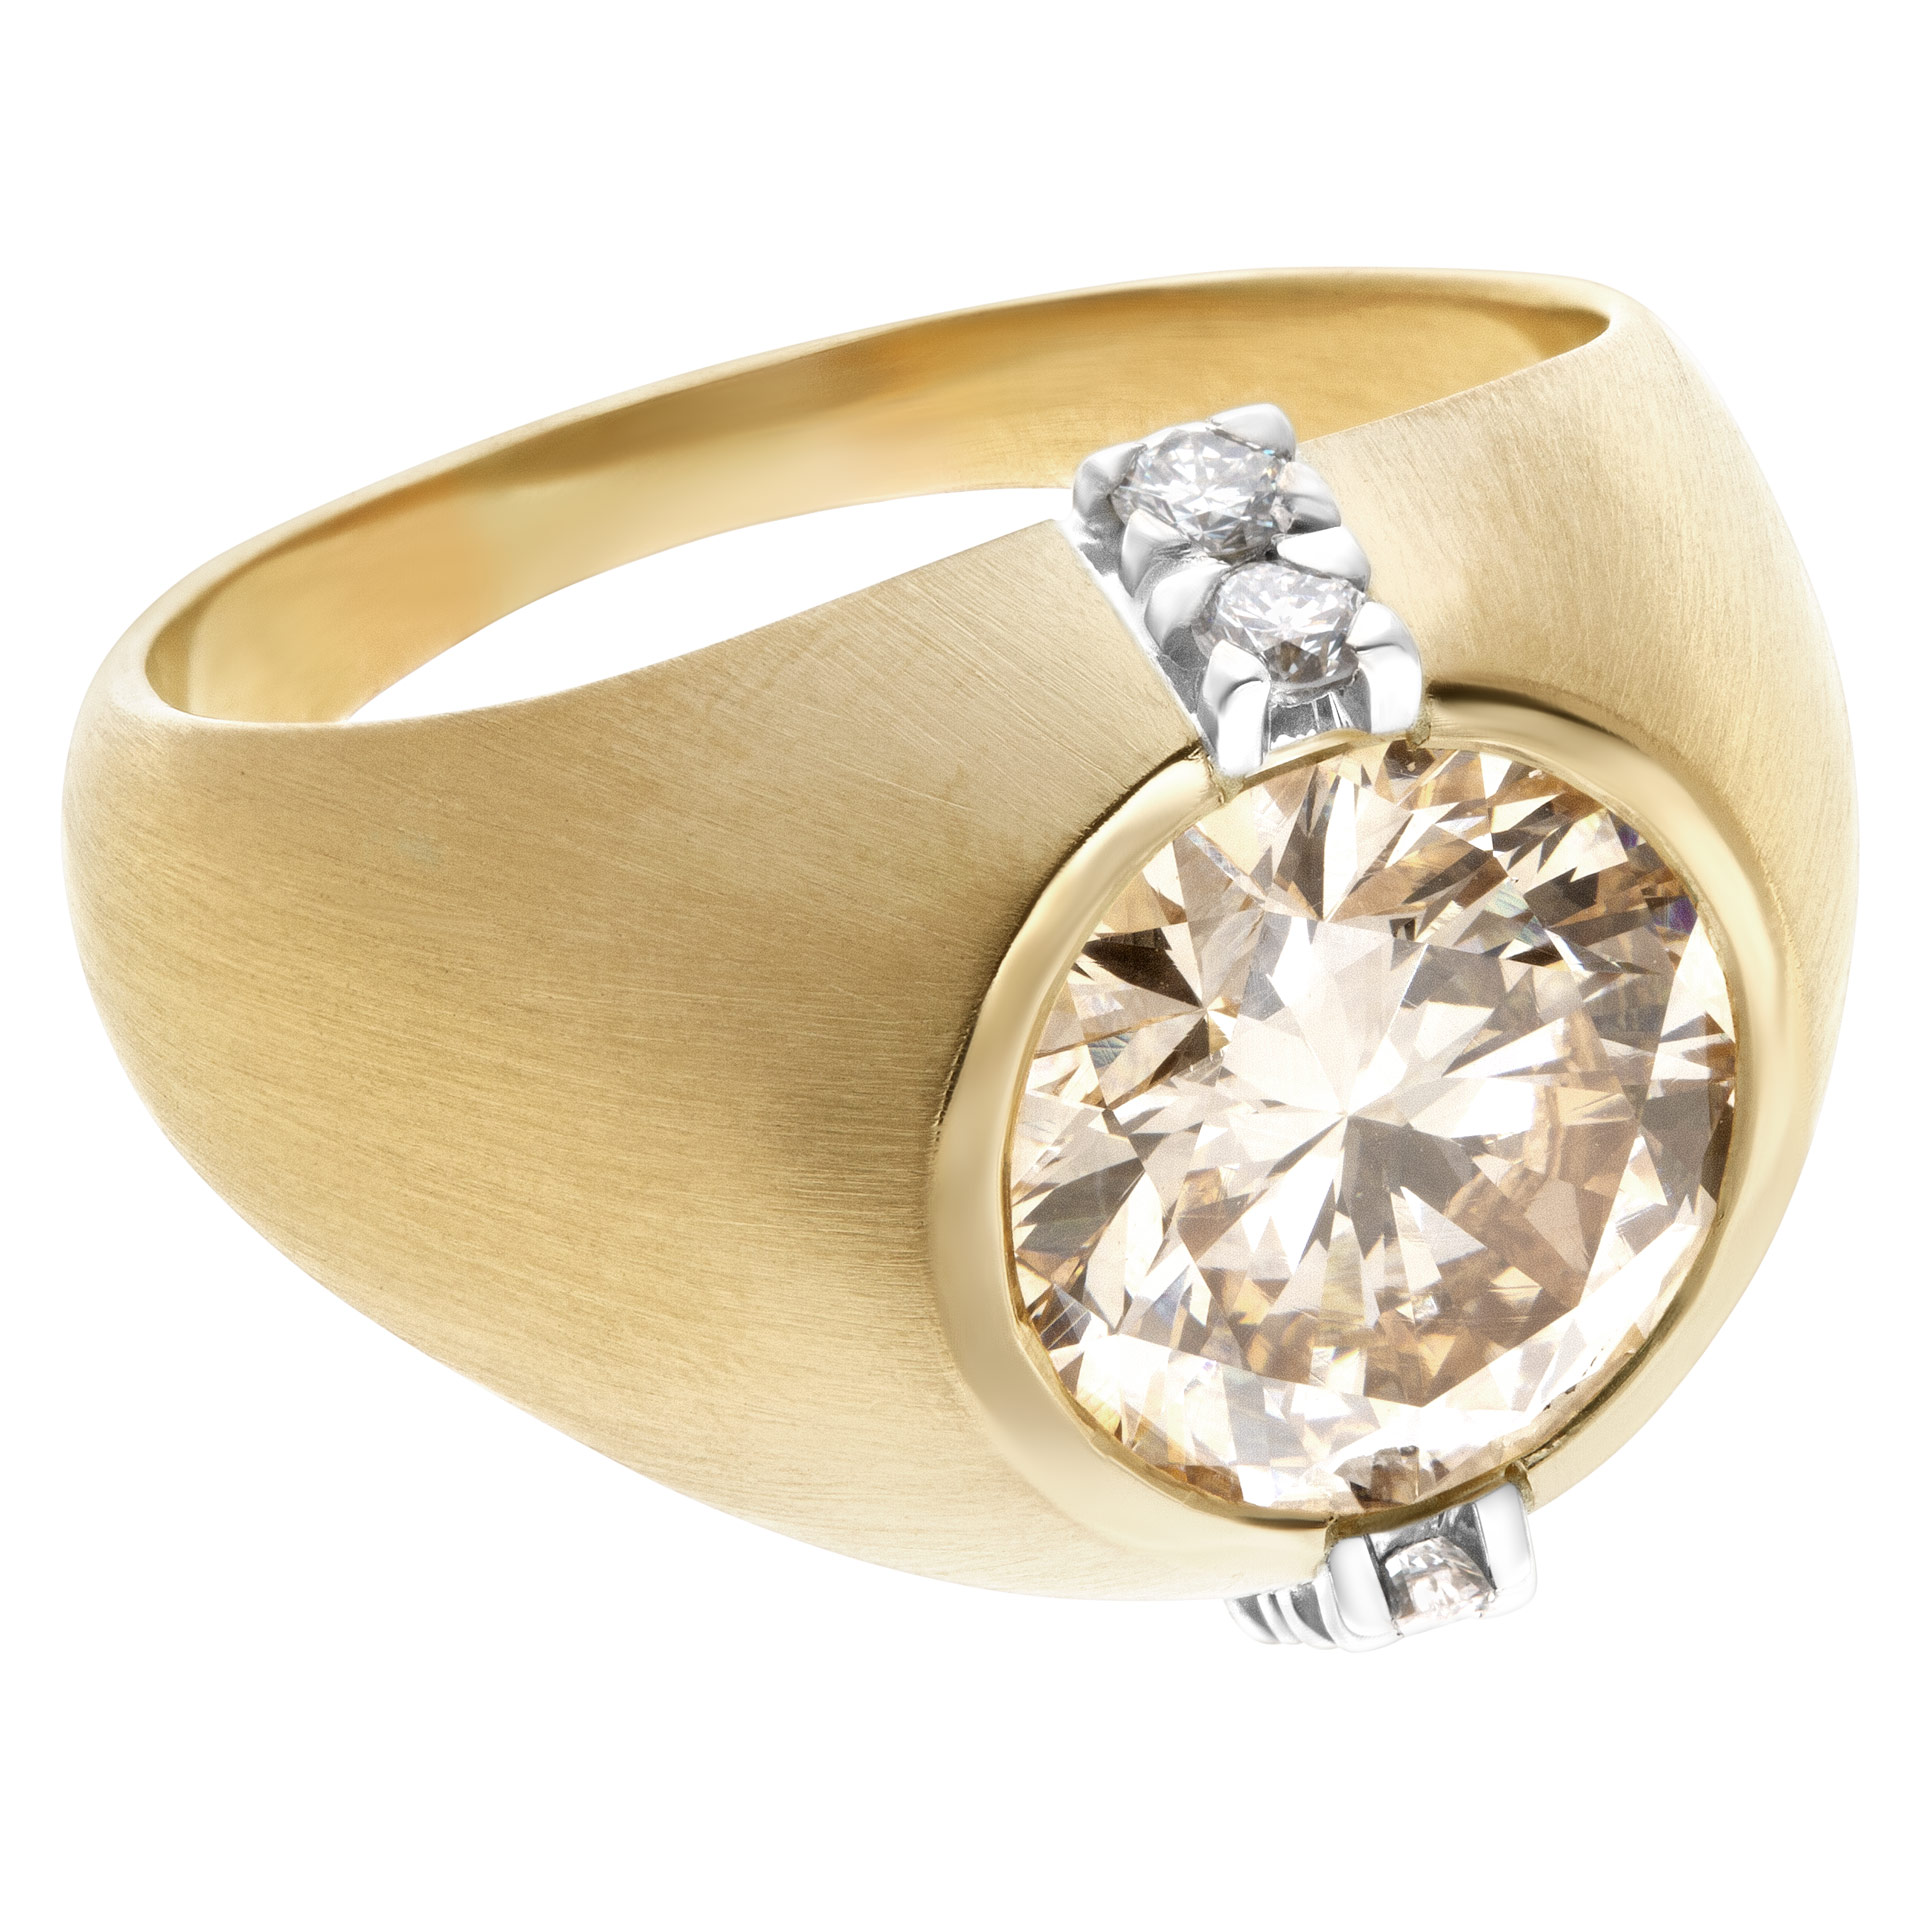 GIA Certified Kutchinsky diamond ring in 18k yellow gold. Warm and bright 4.23 carat center diamond champgane color, VS1 clarity image 3